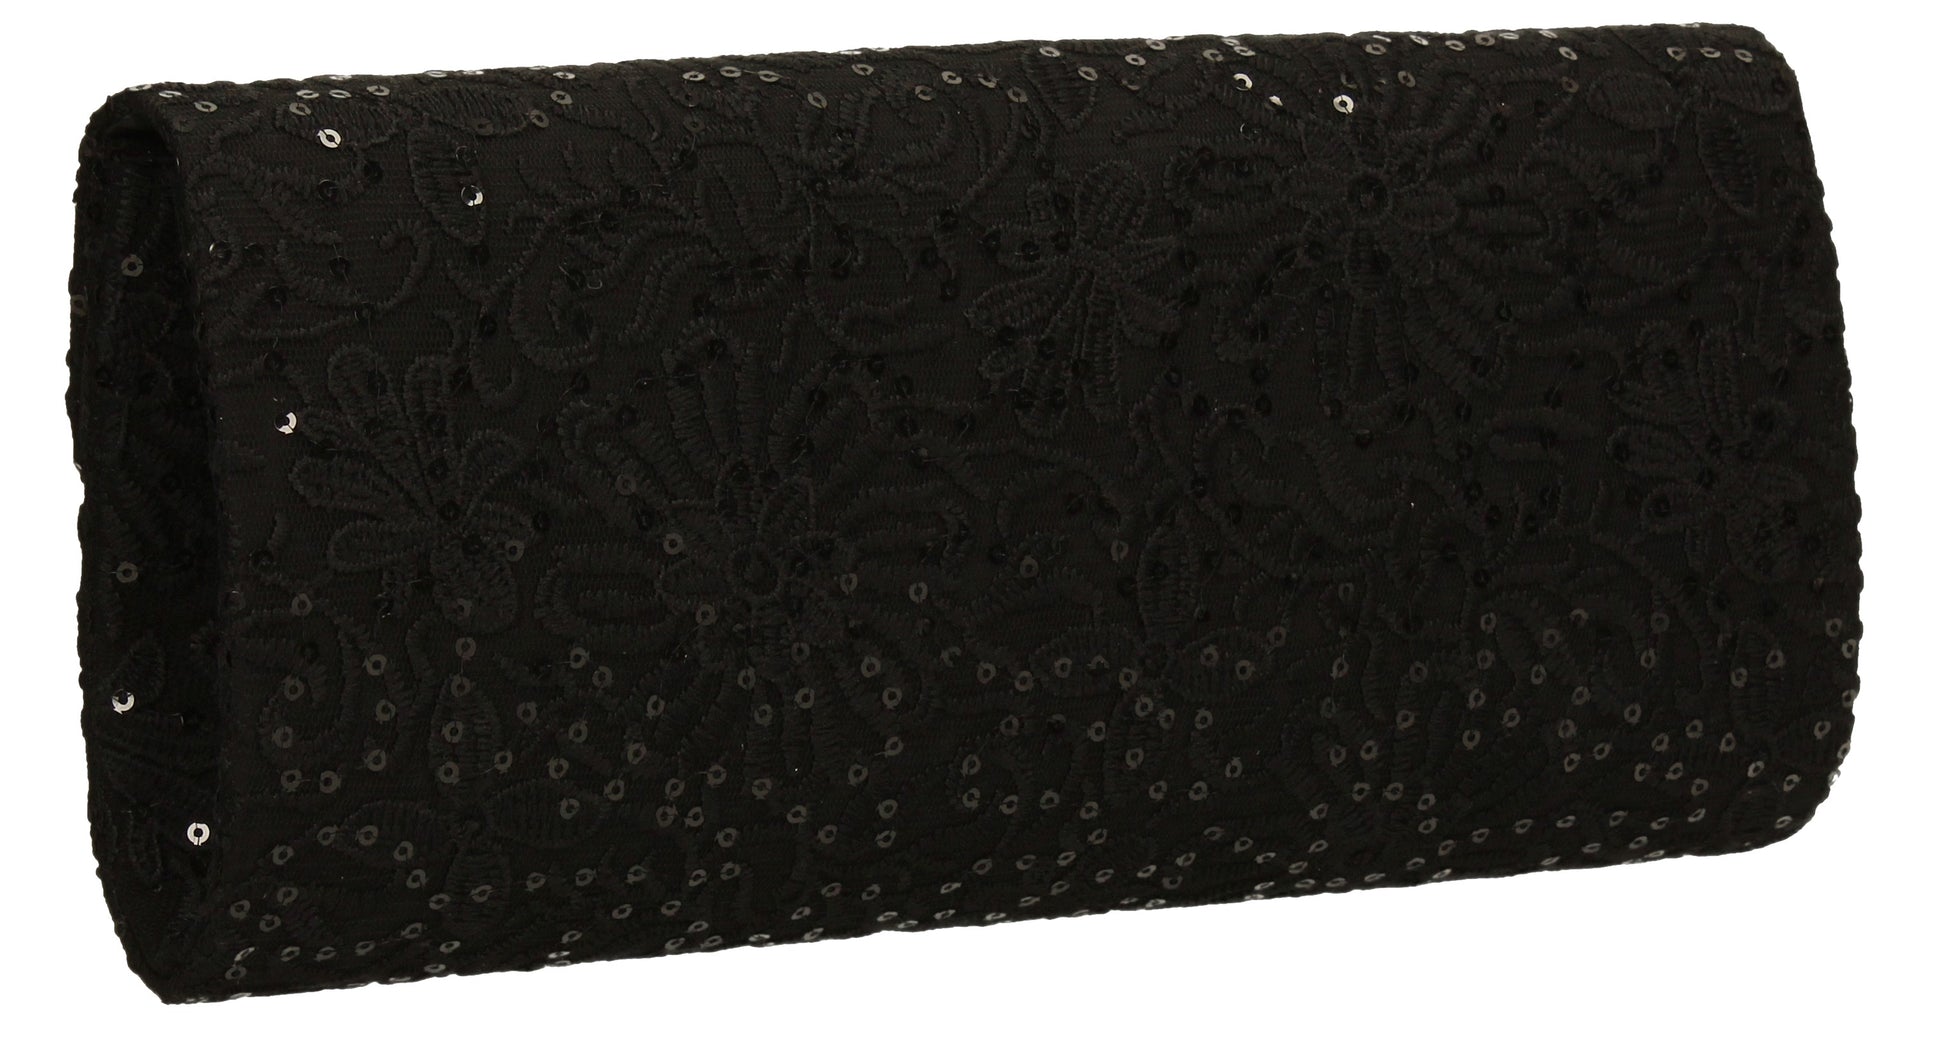 SWANKYSWANS Julia Lace Sequin Clutch Bag Black Cute Cheap Clutch Bag For Weddings School and Work